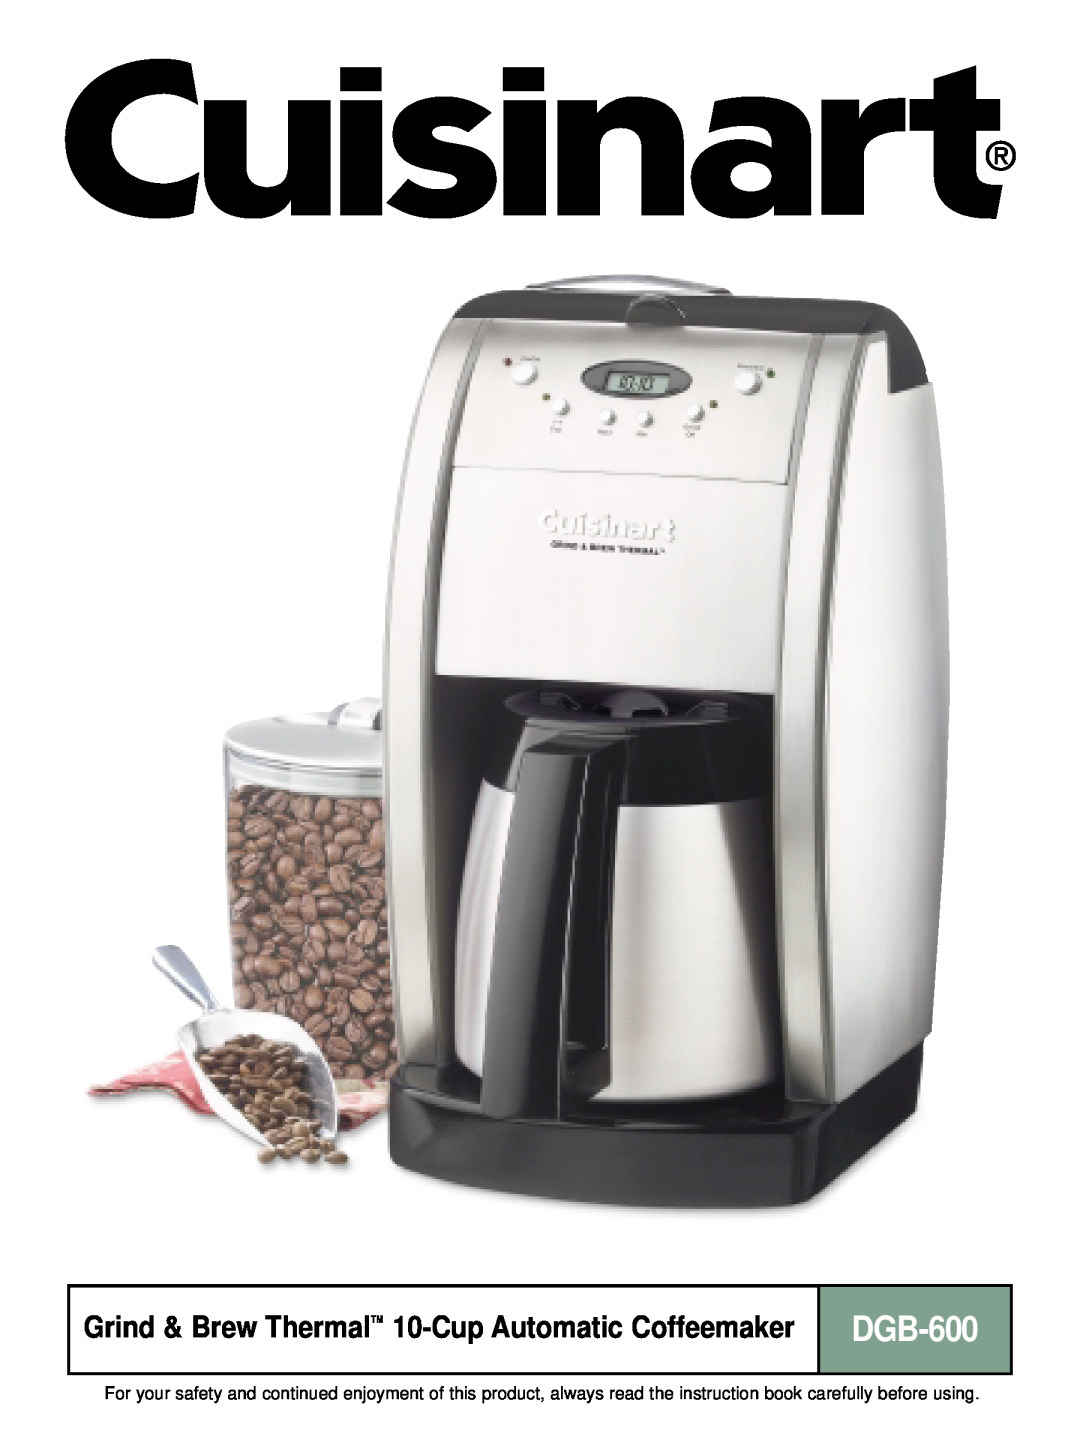 Cuisinart DGB-600 manual Grind & Brew Thermal 10-Cup Automatic Coffeemaker 